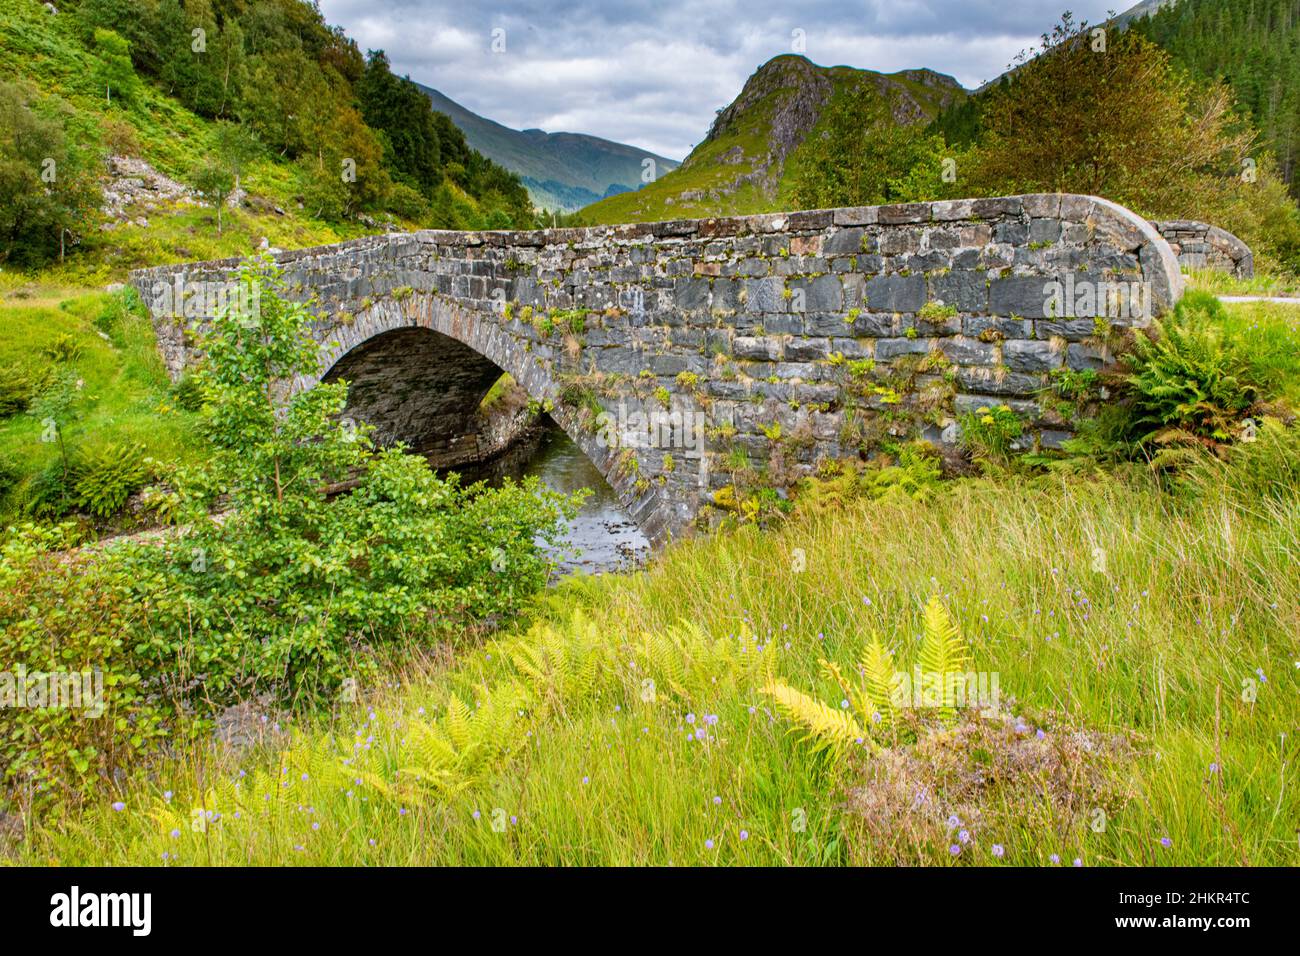 A picture perfect bridge iover a river in the Highlands of Scotland Stock Photo